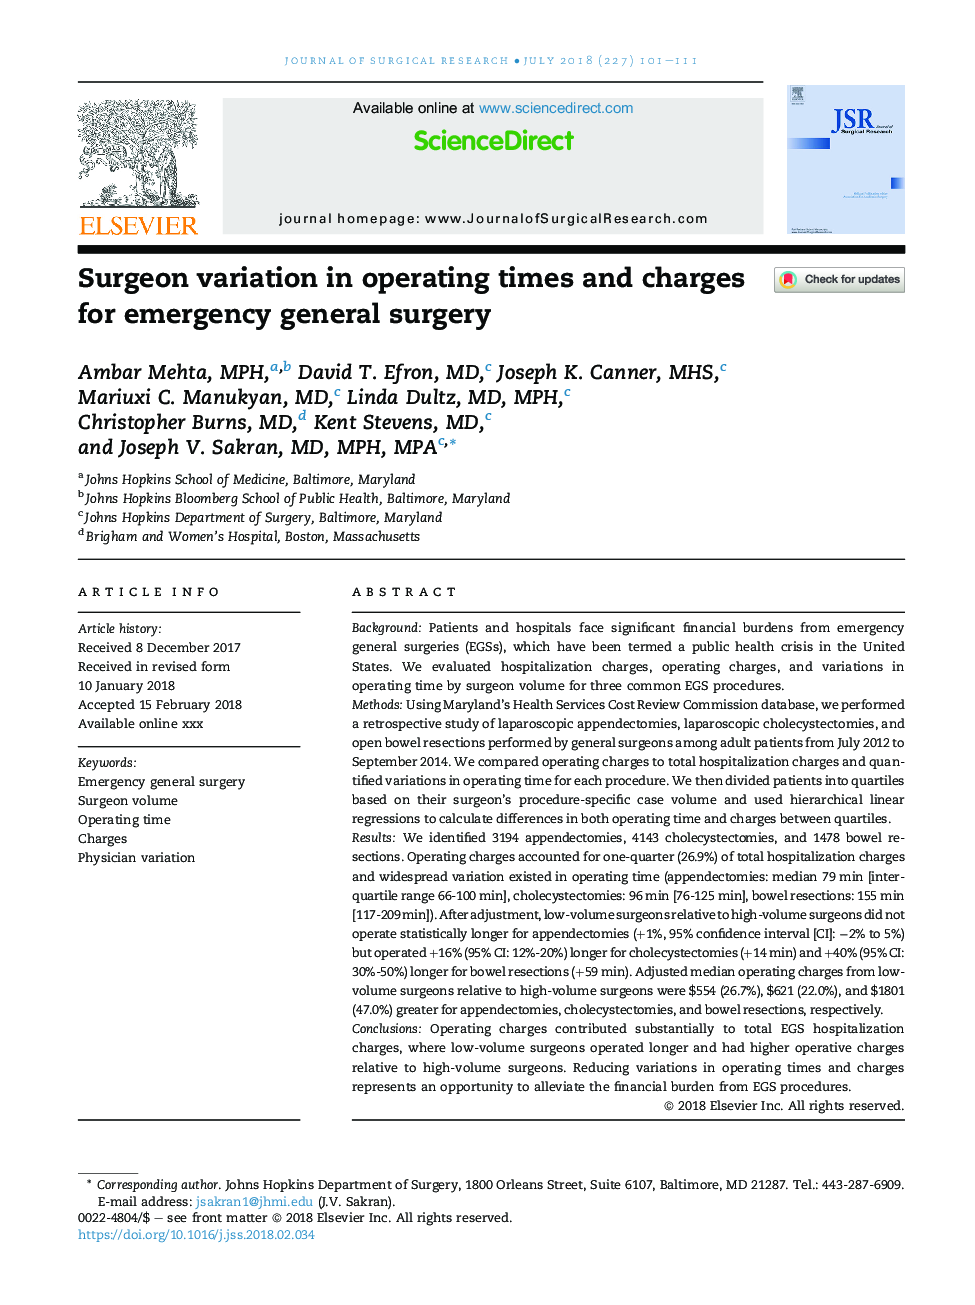 Surgeon variation in operating times and charges for emergency general surgery